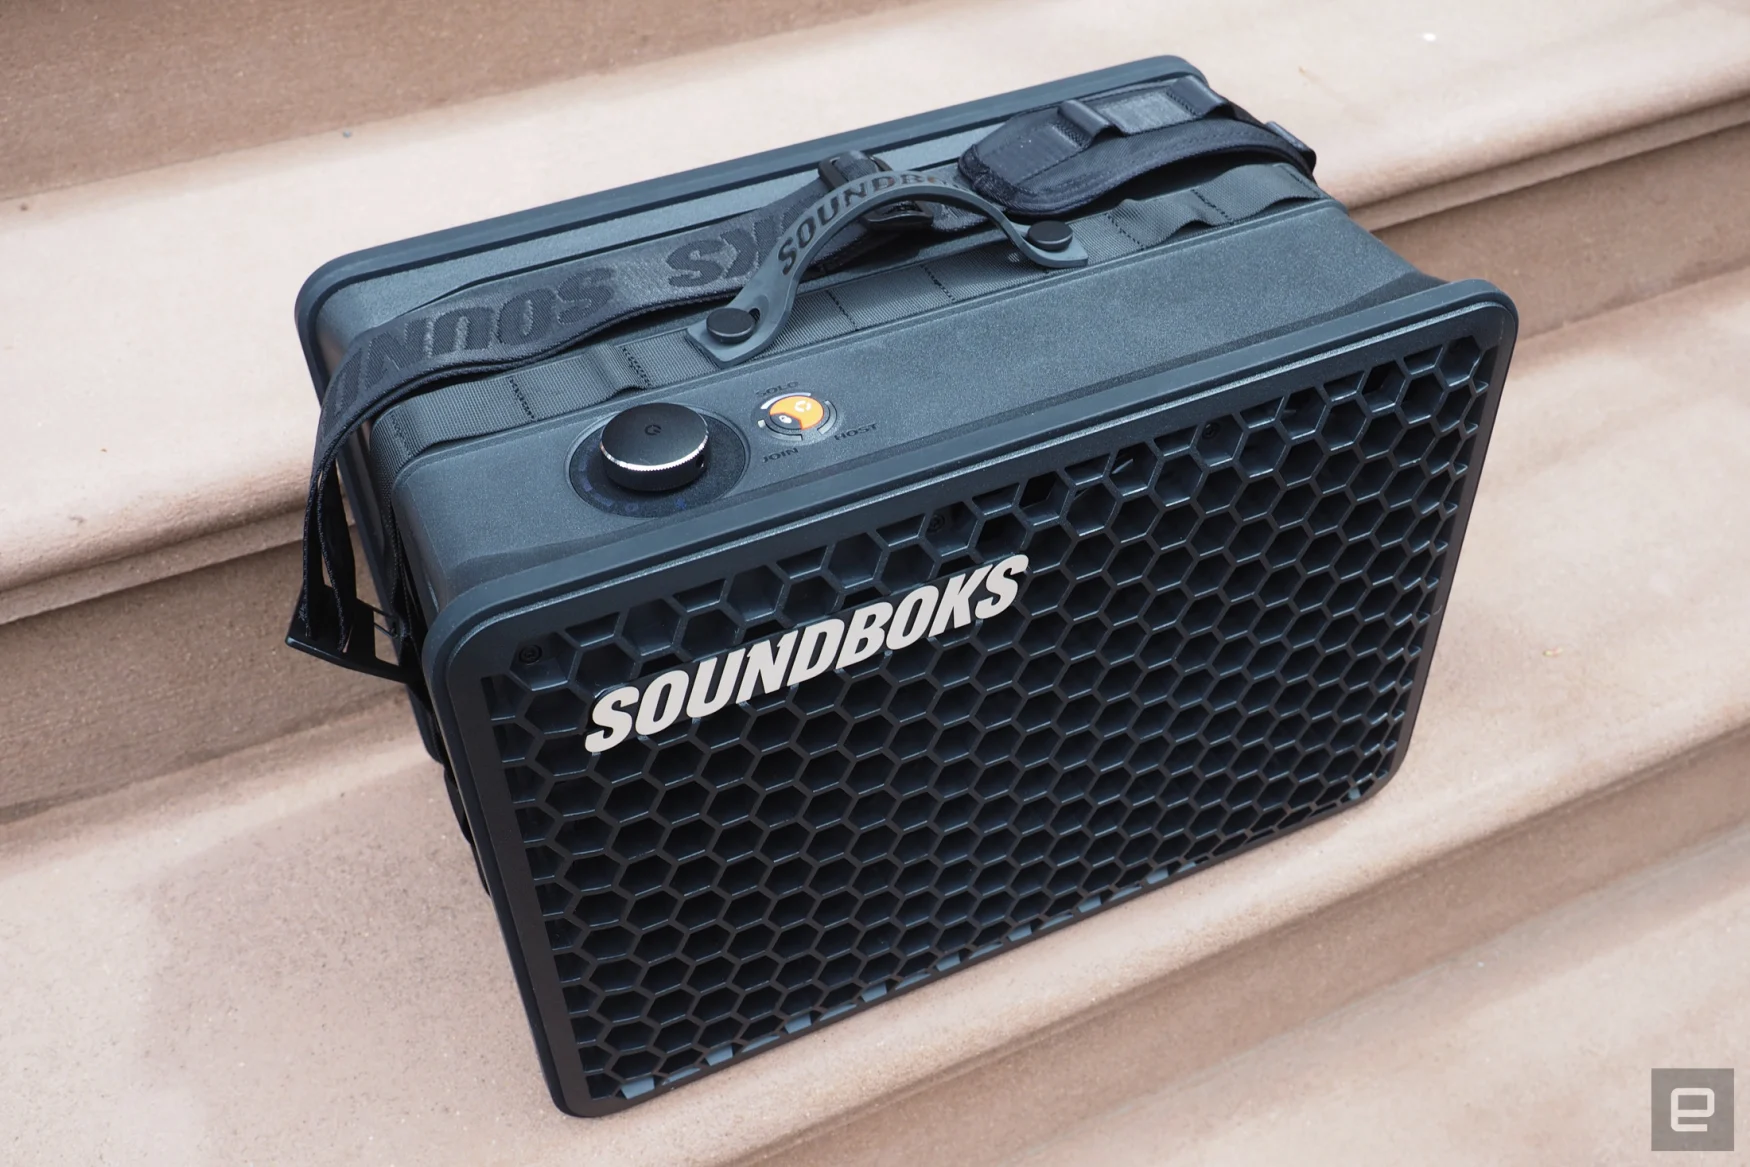 The Soundboks Go portable Bluetooth speaker seen on the front steps of a Brooklyn brownstone.